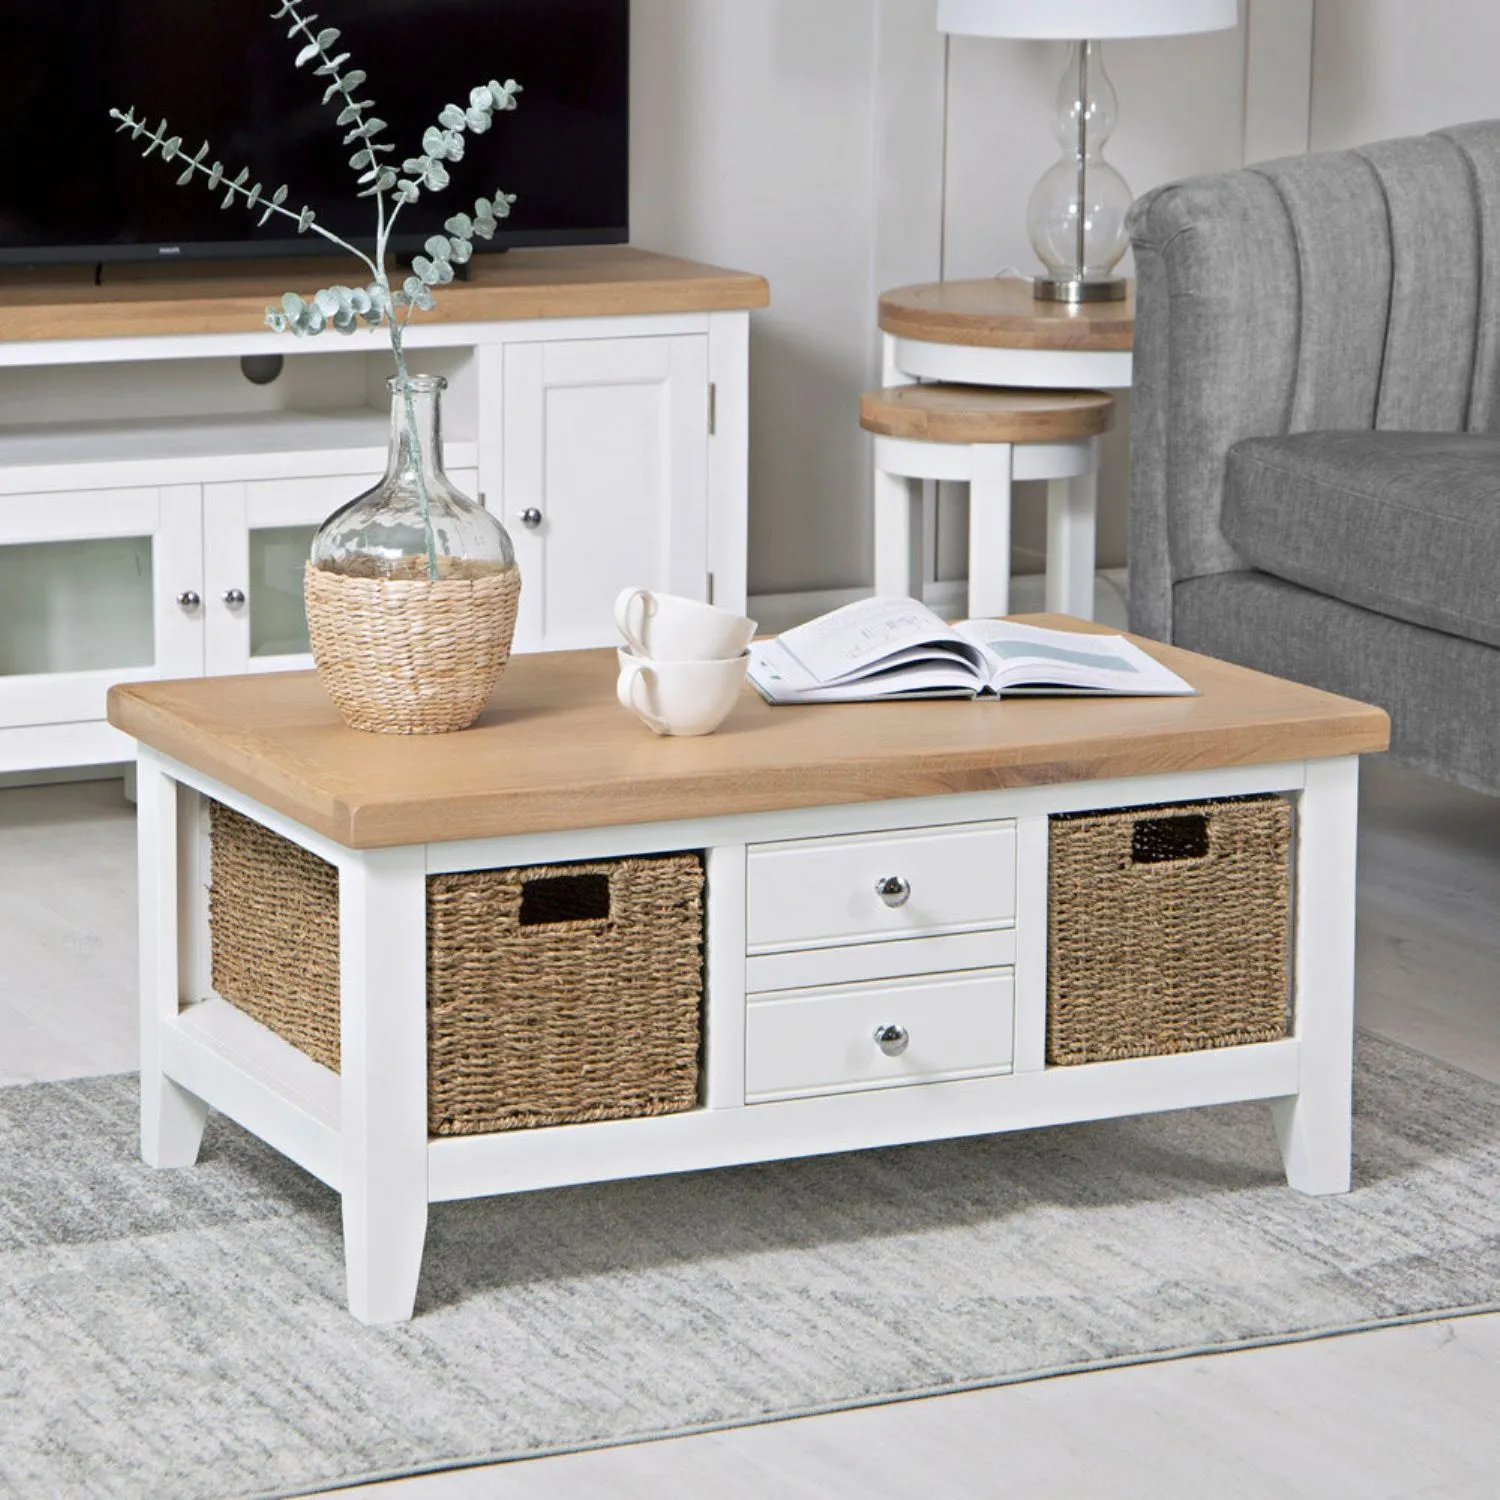 EA Dining White Coffee table